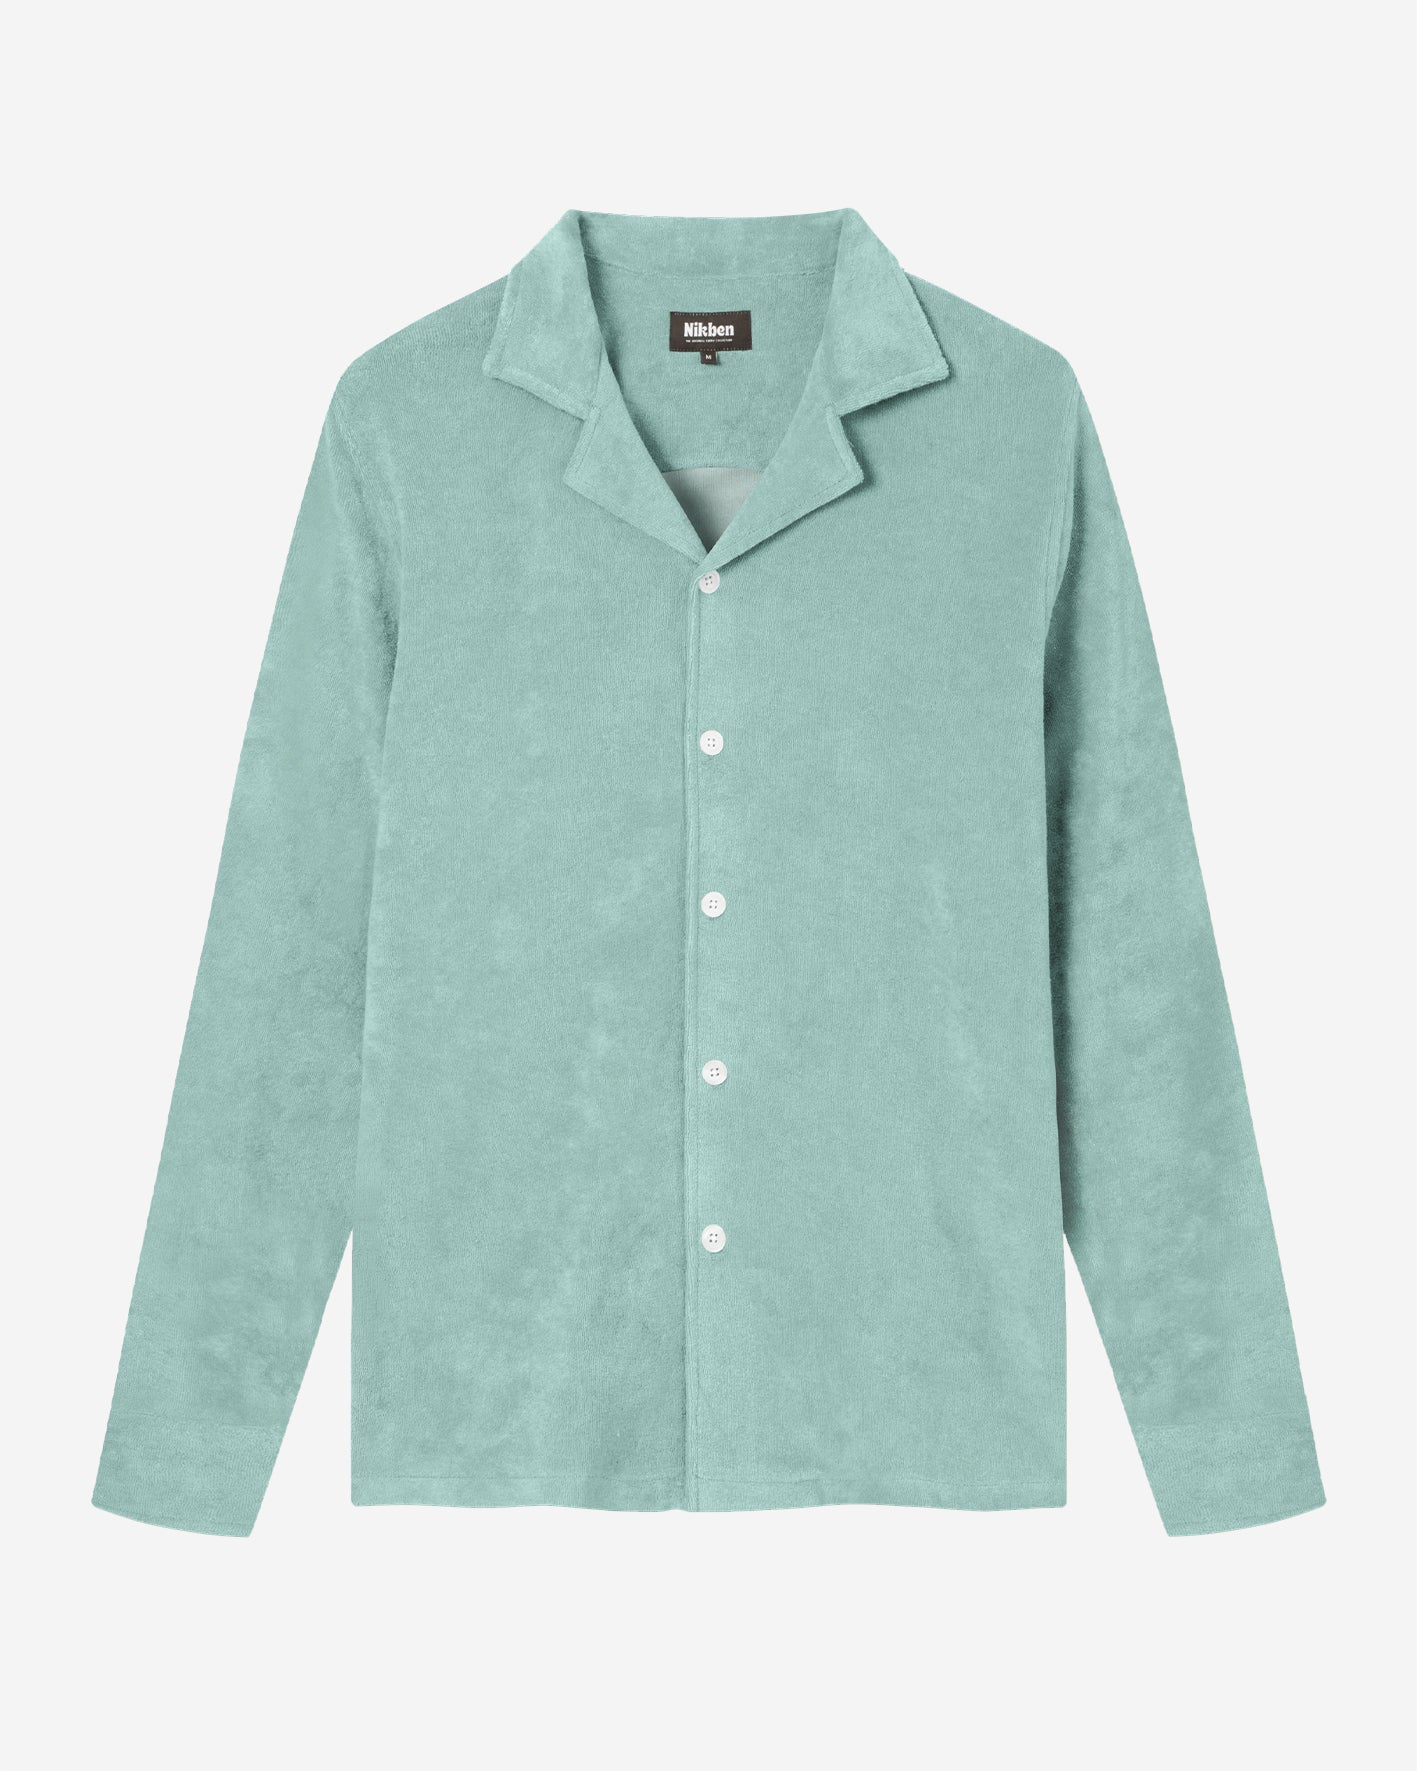 Green long sleeve shirt with white buttons